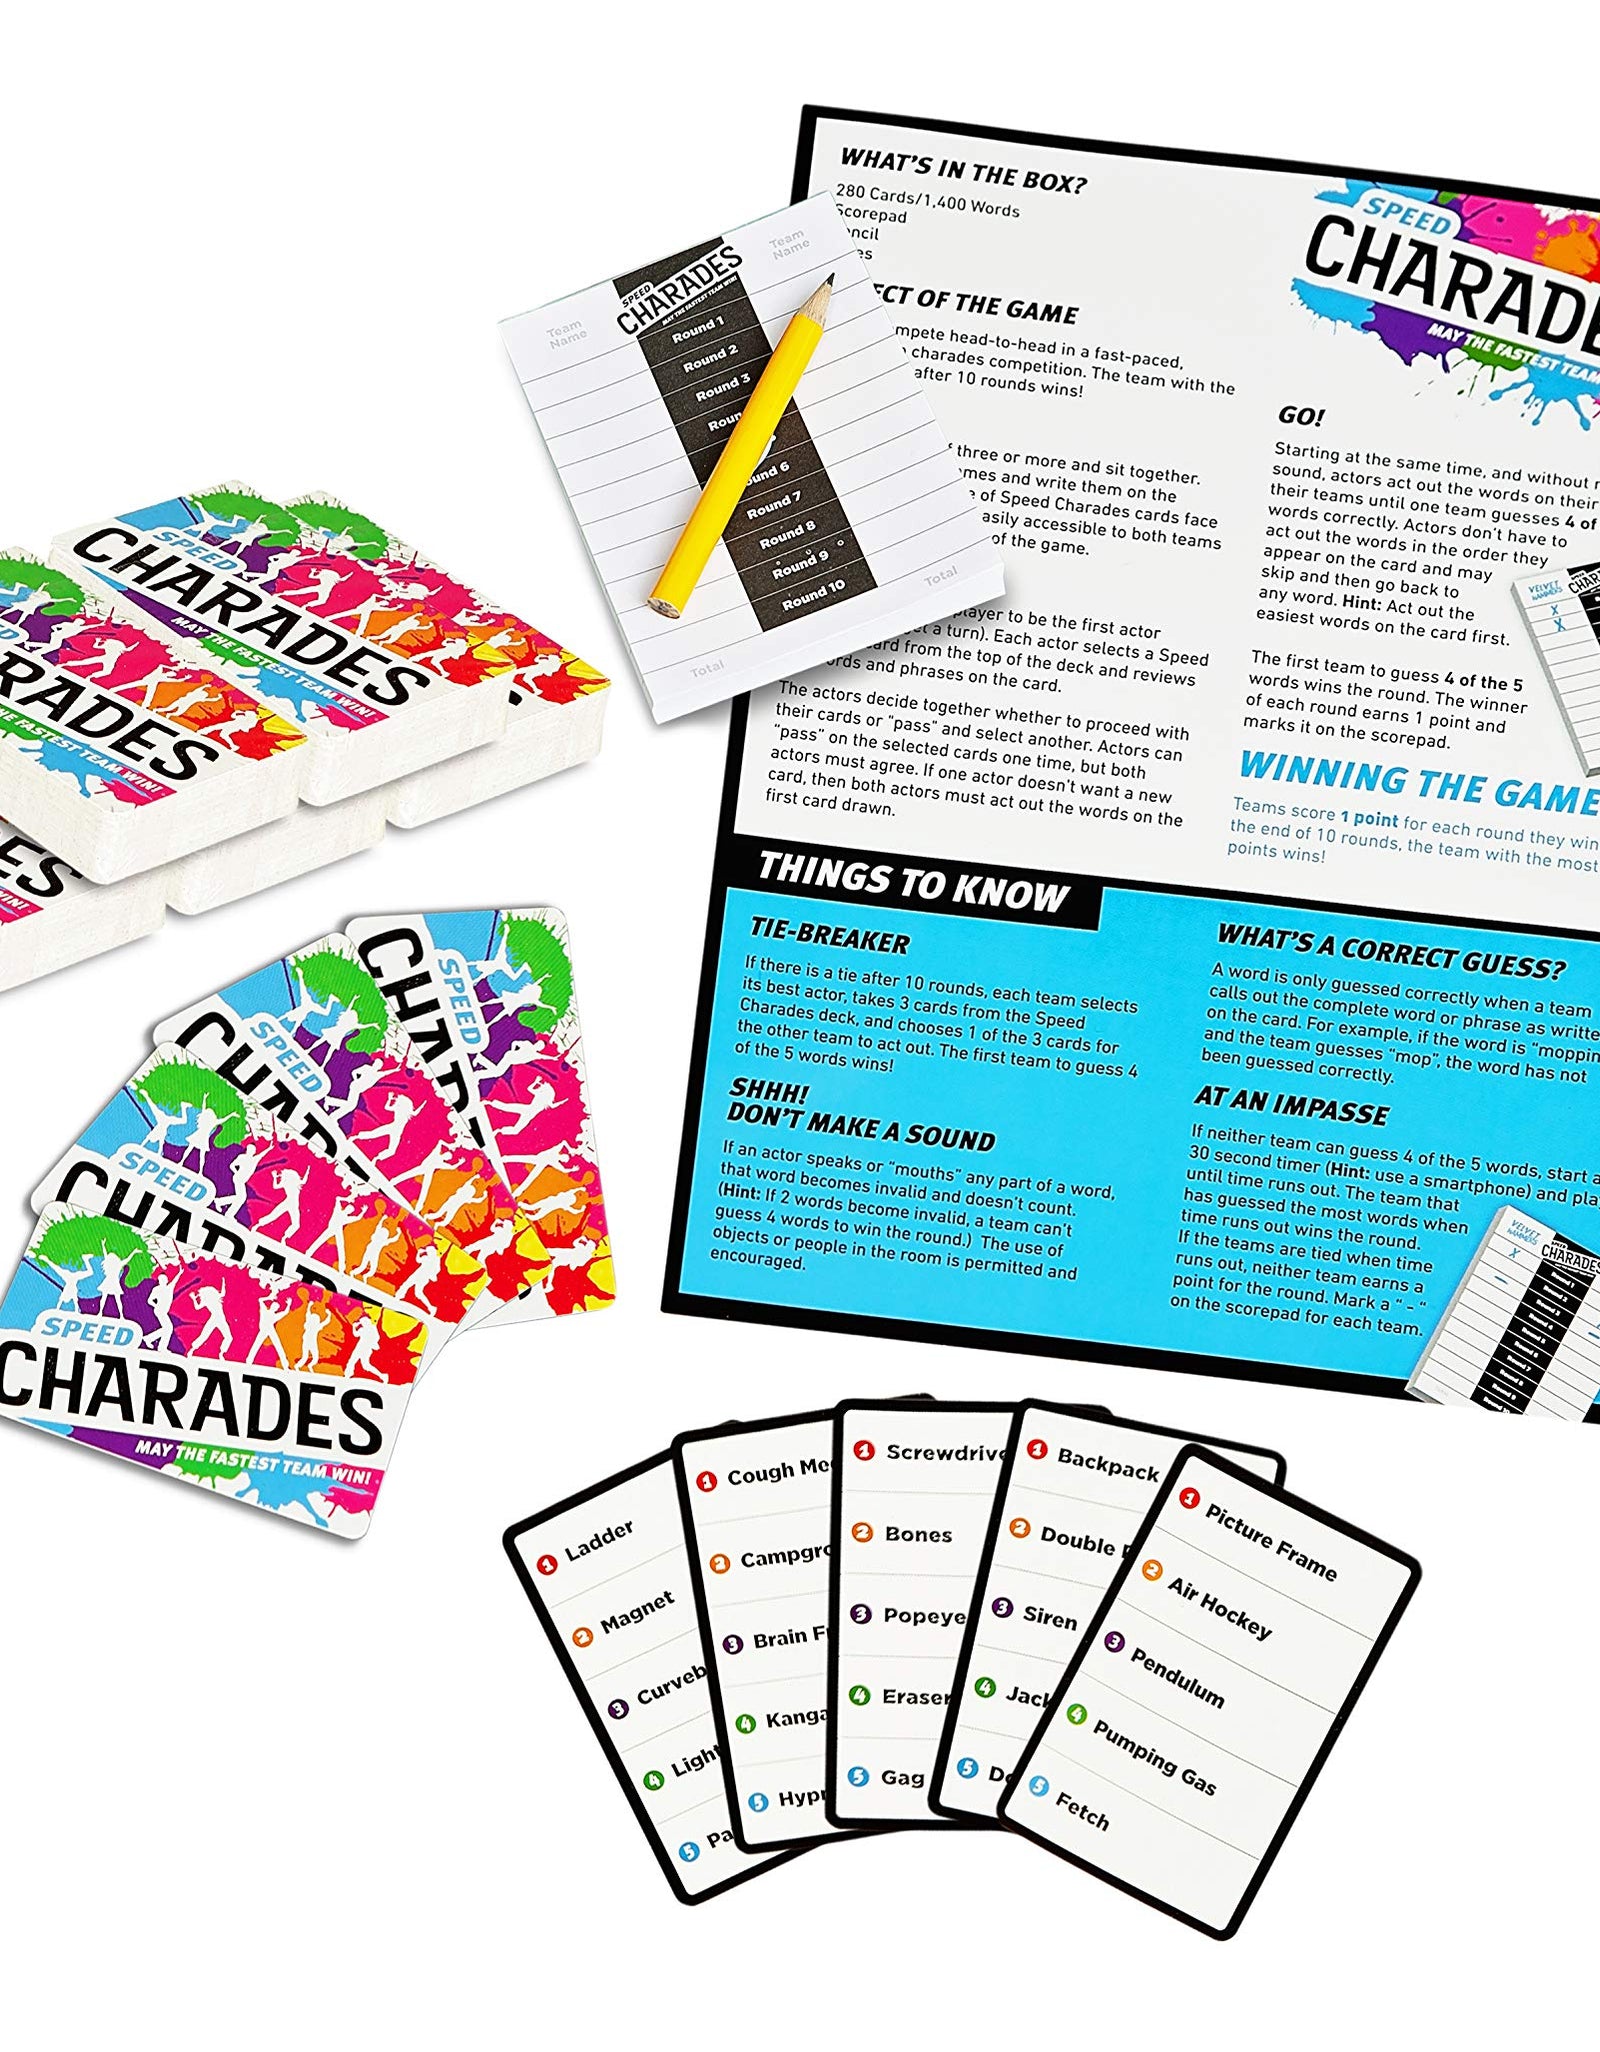 Charades Party Game – Speed Charades Board Game - Fast-Paced Party Game - Includes 1400 Charades - Perfect for Groups and Family Game Nights